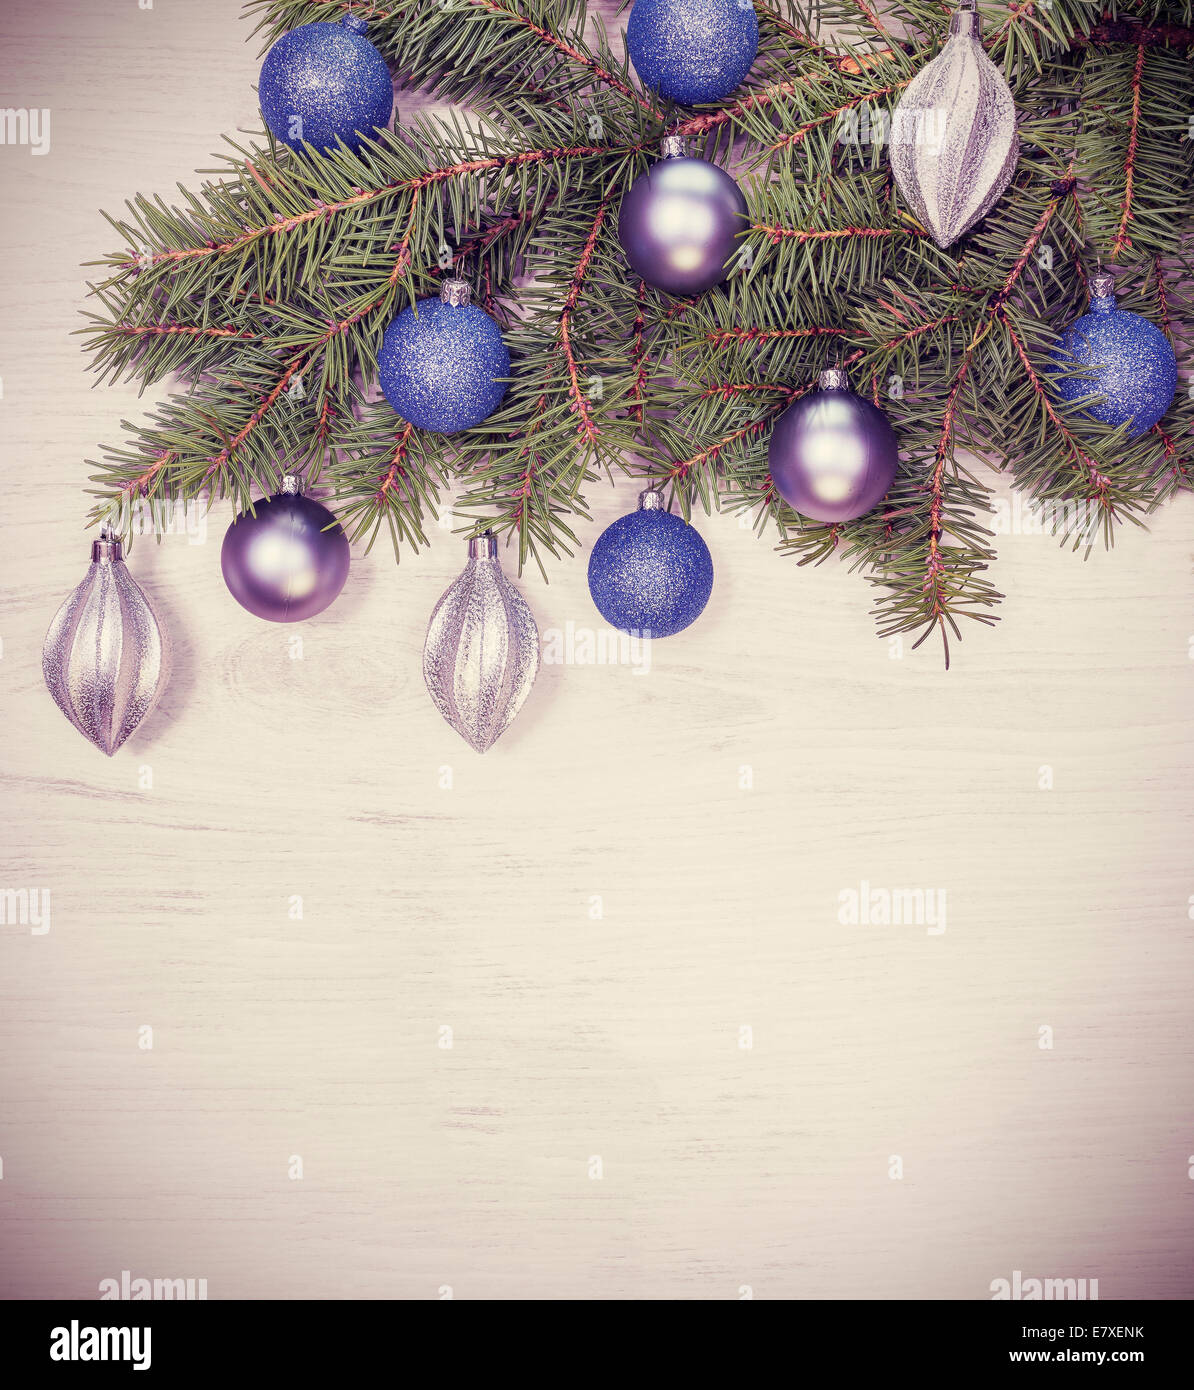 Vintage Christmas background, decoration on a white wooden board. Stock Photo